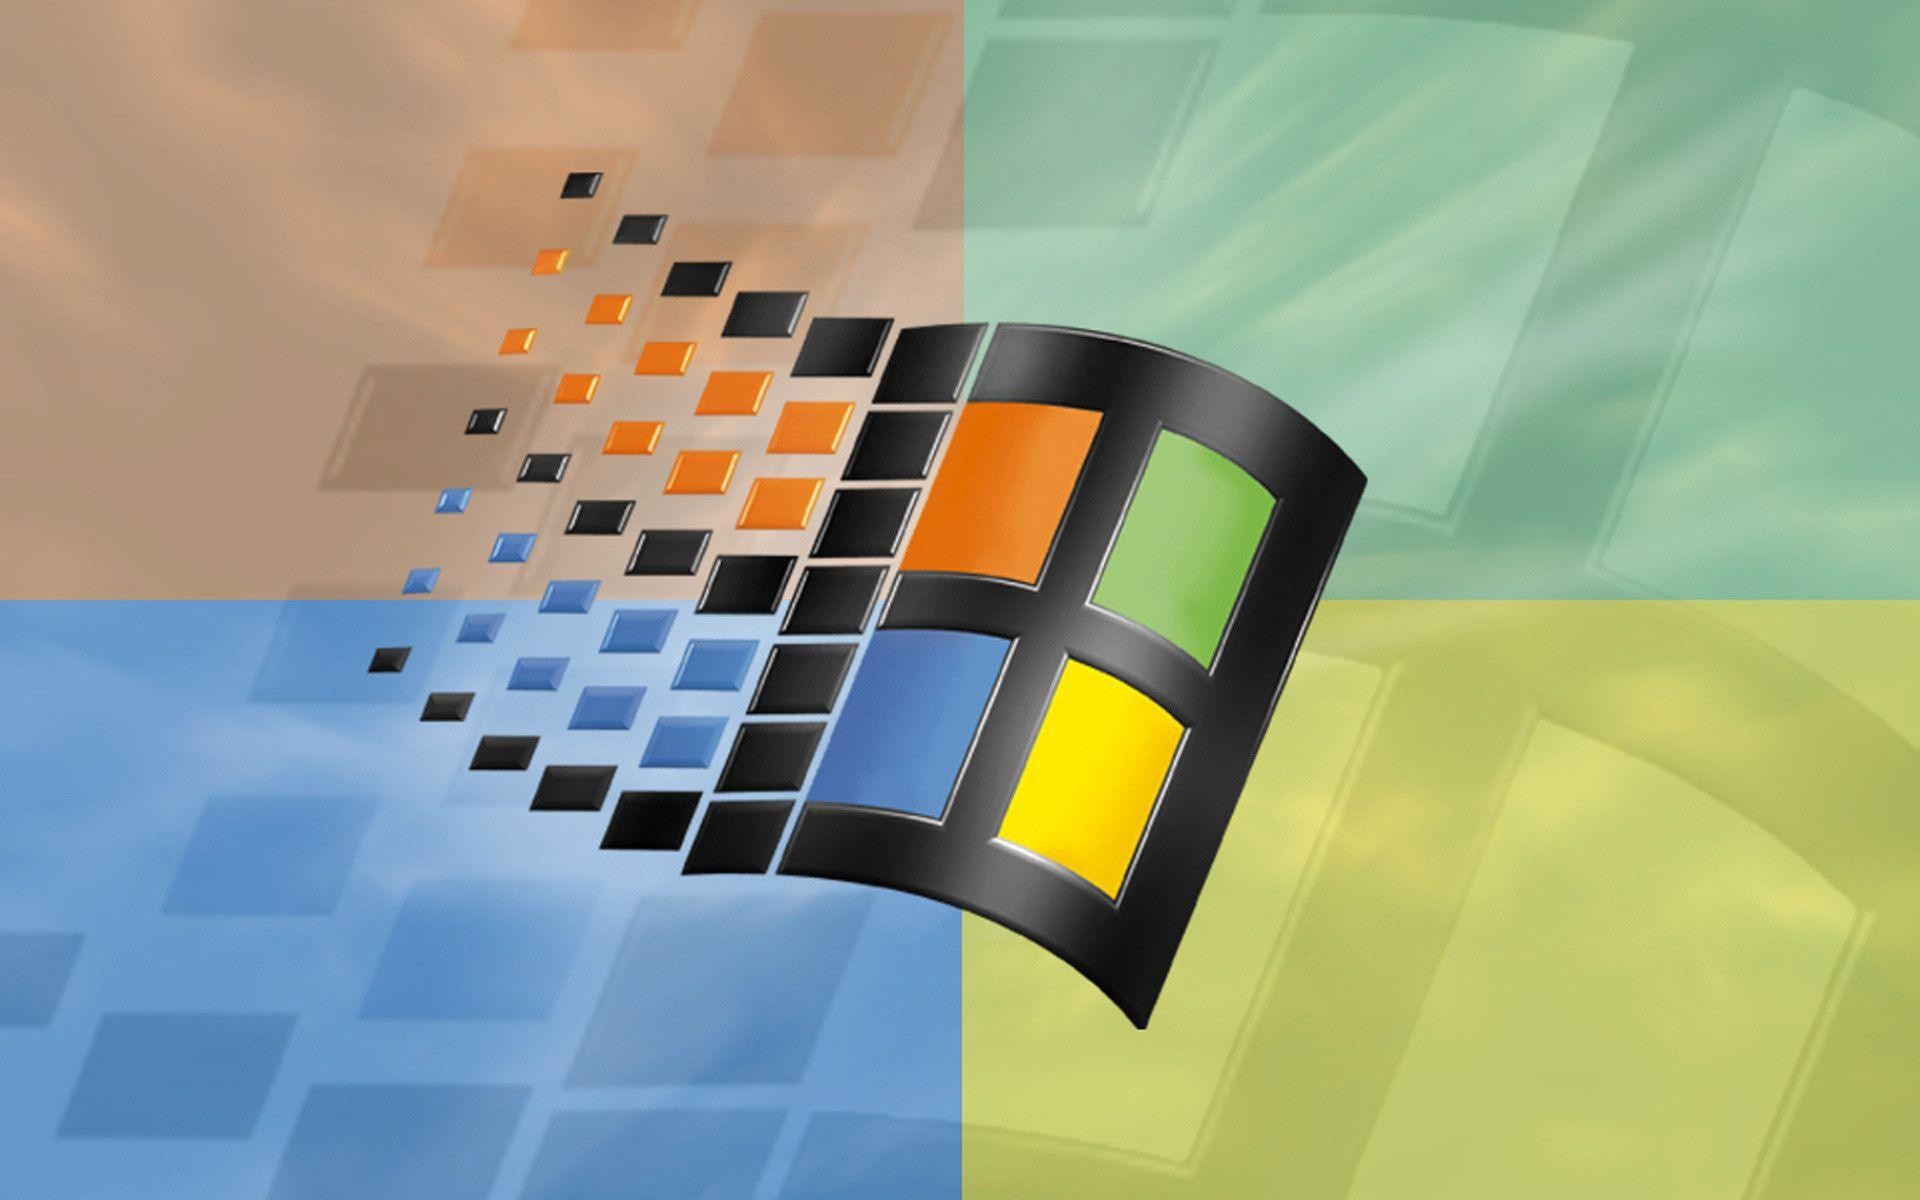 1920x1200 windows-98-wallpapers-2 - AHD Images